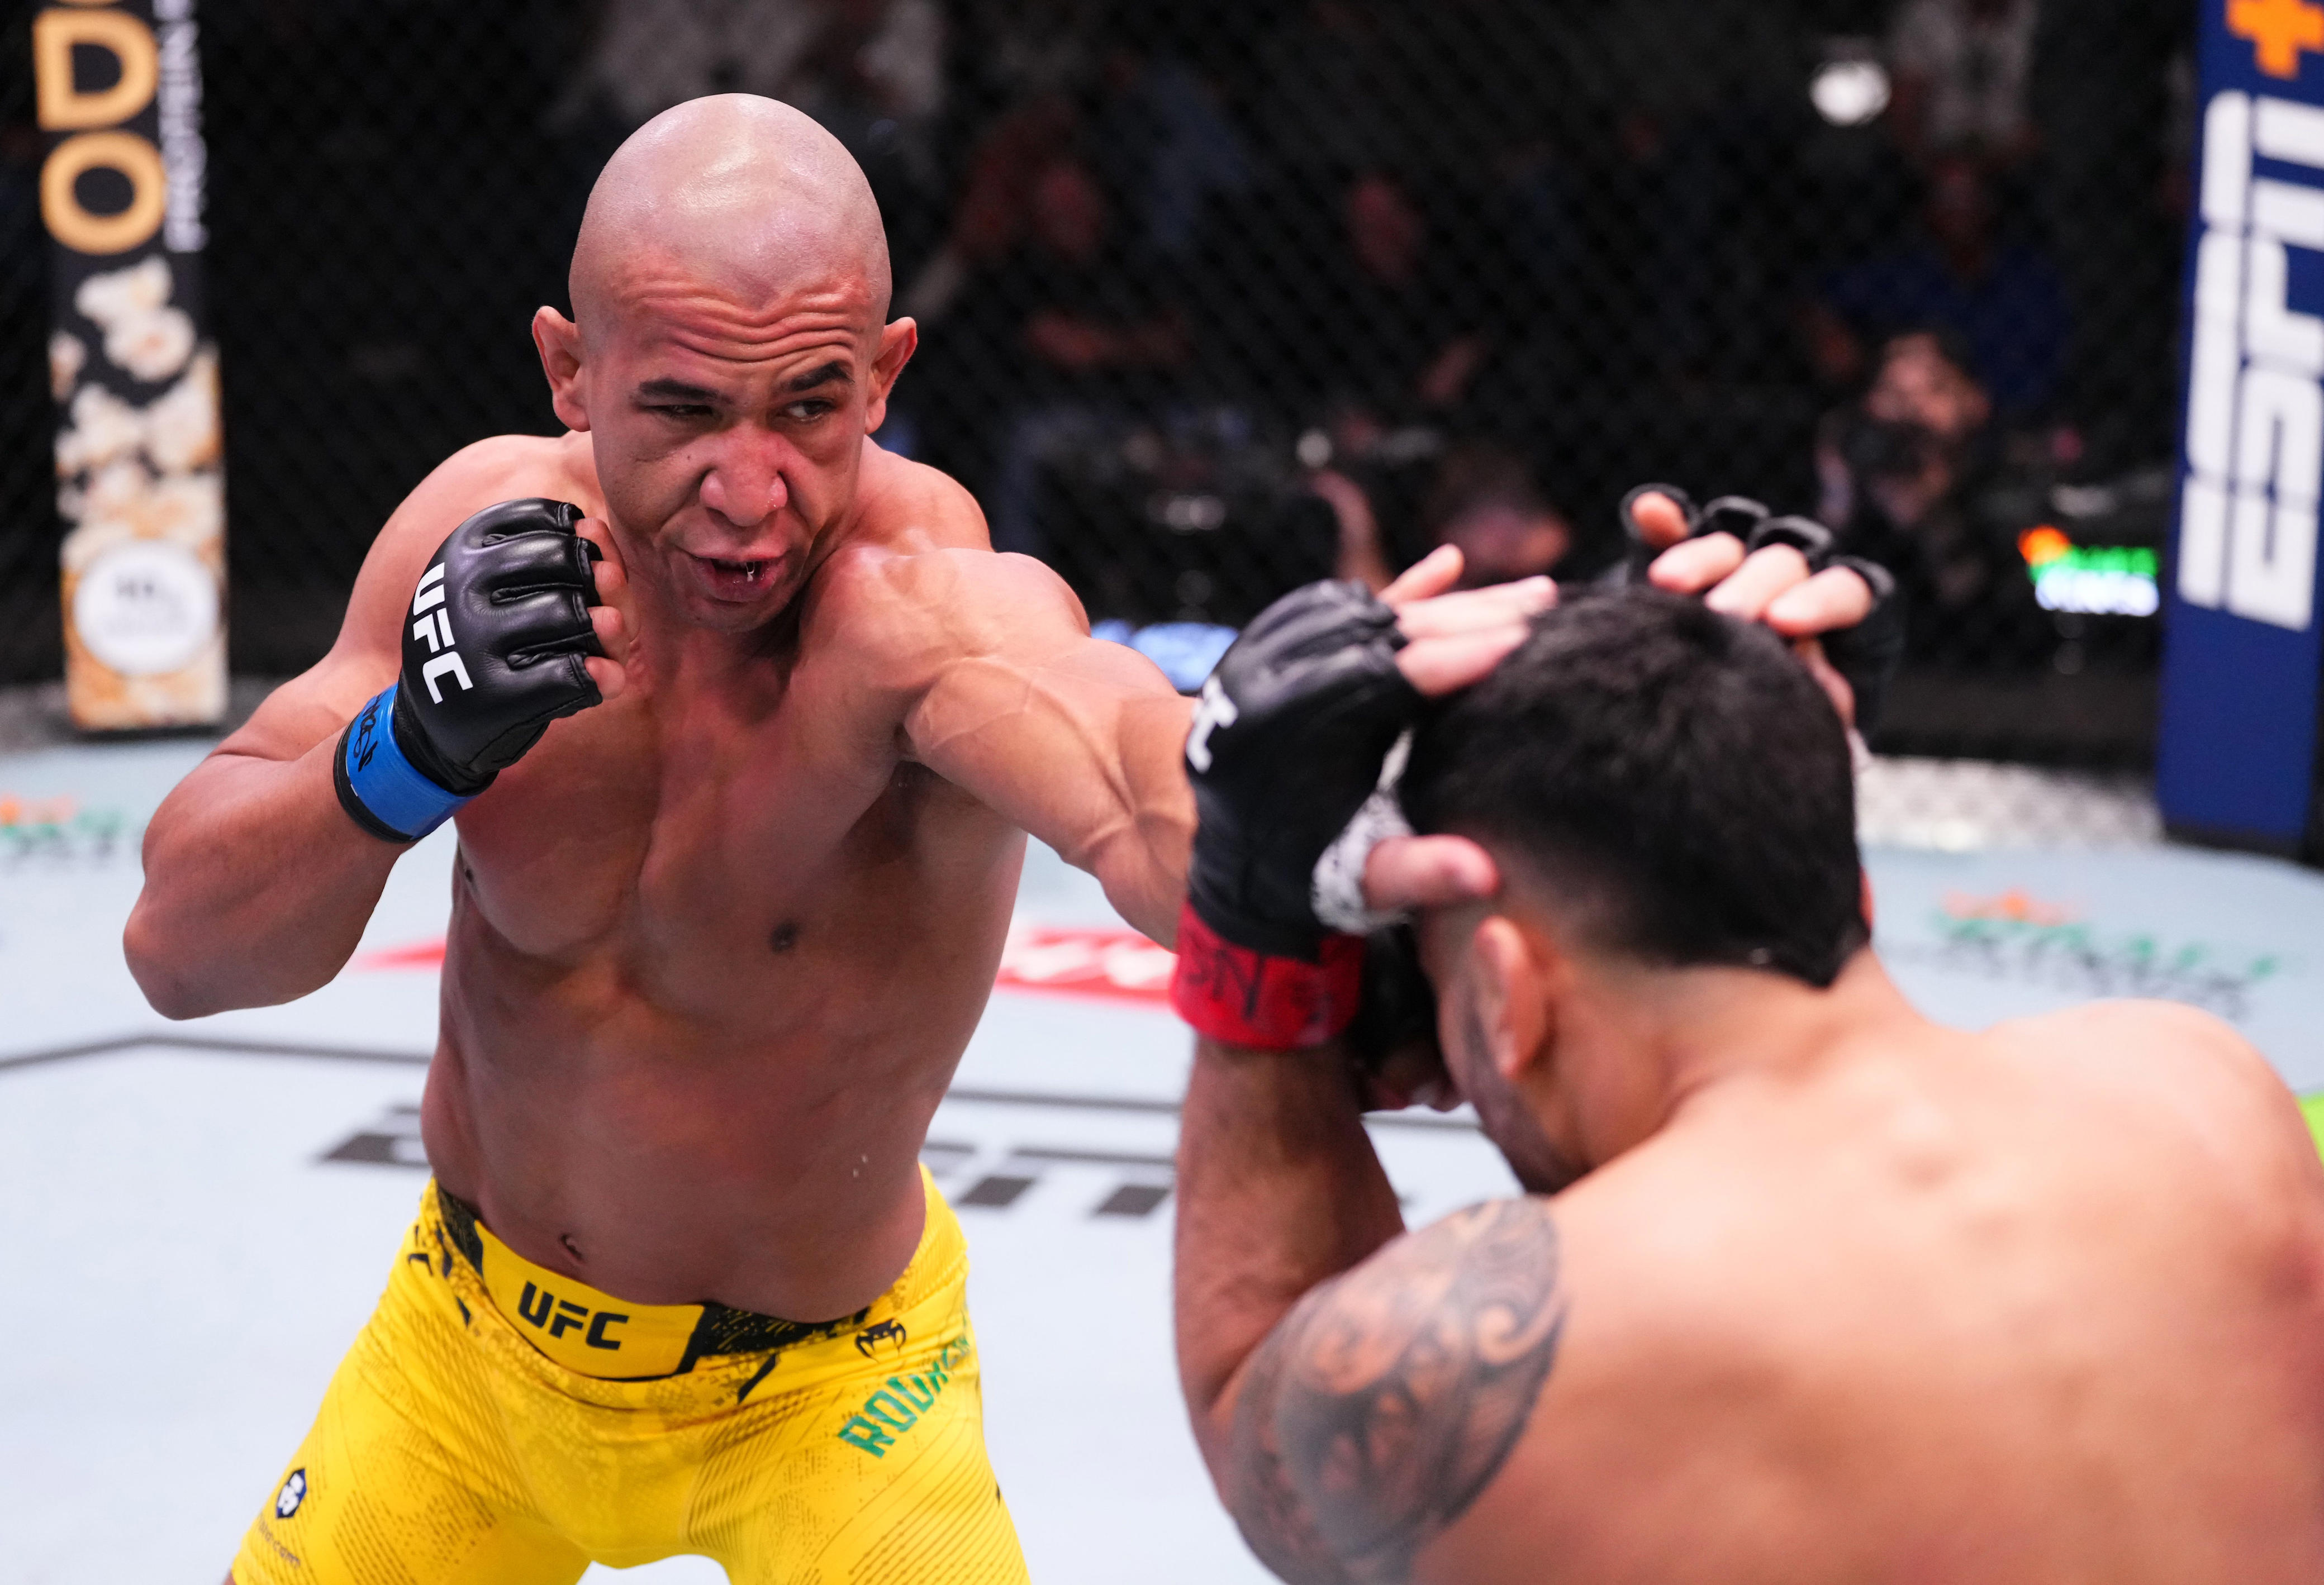 usa today sports/mma junkie rankings, feb. 13: 'robocop' gregory rodrigues making noise at middleweight